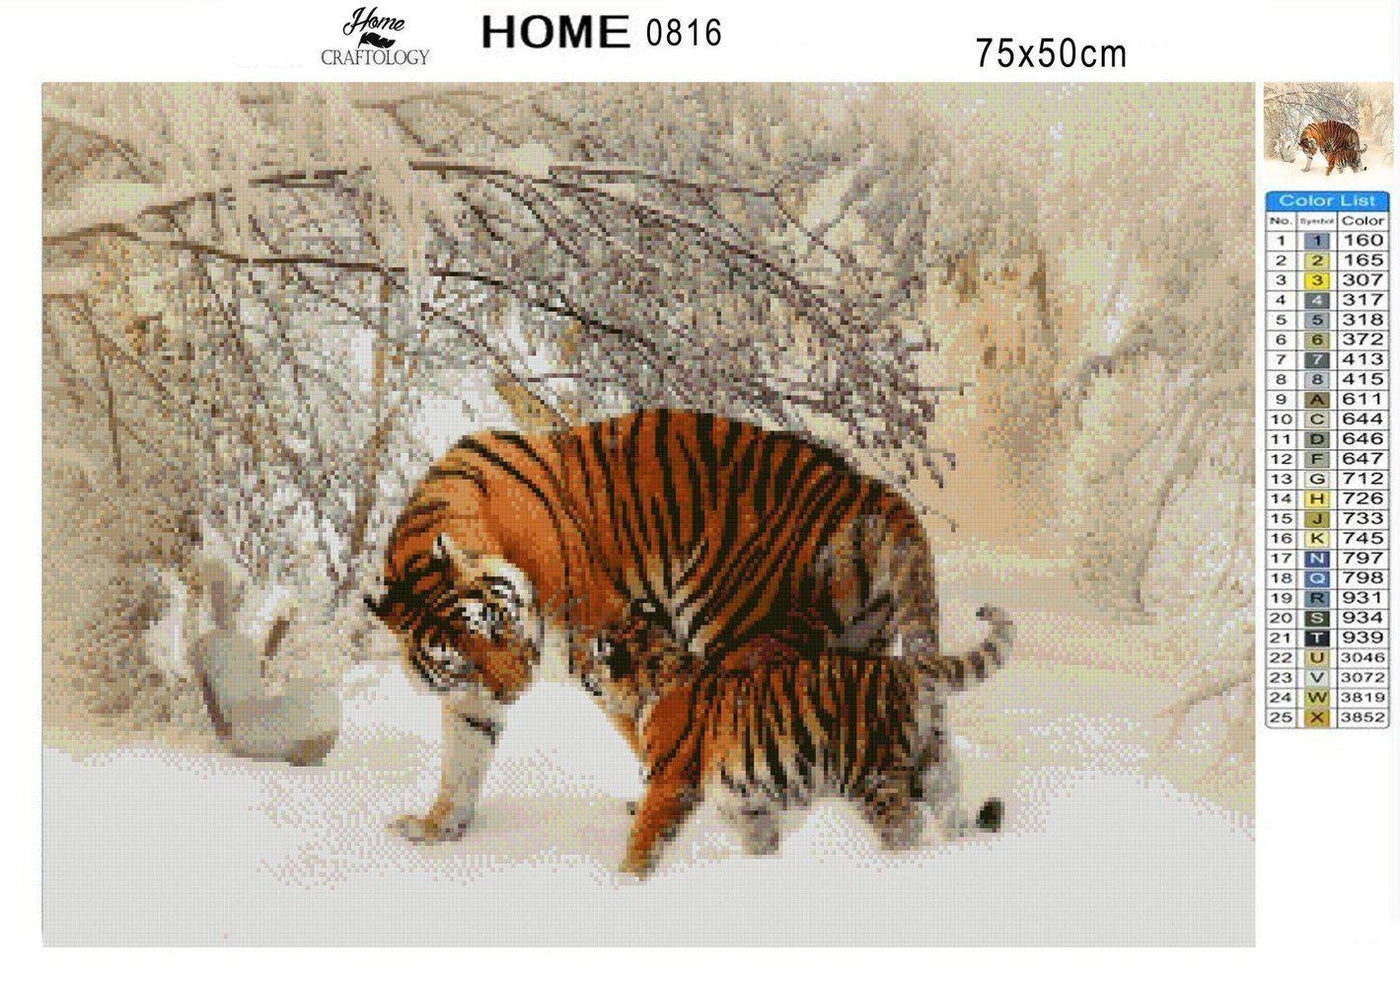 Tigers in Winter - Diamond Painting Kit - Home Craftology